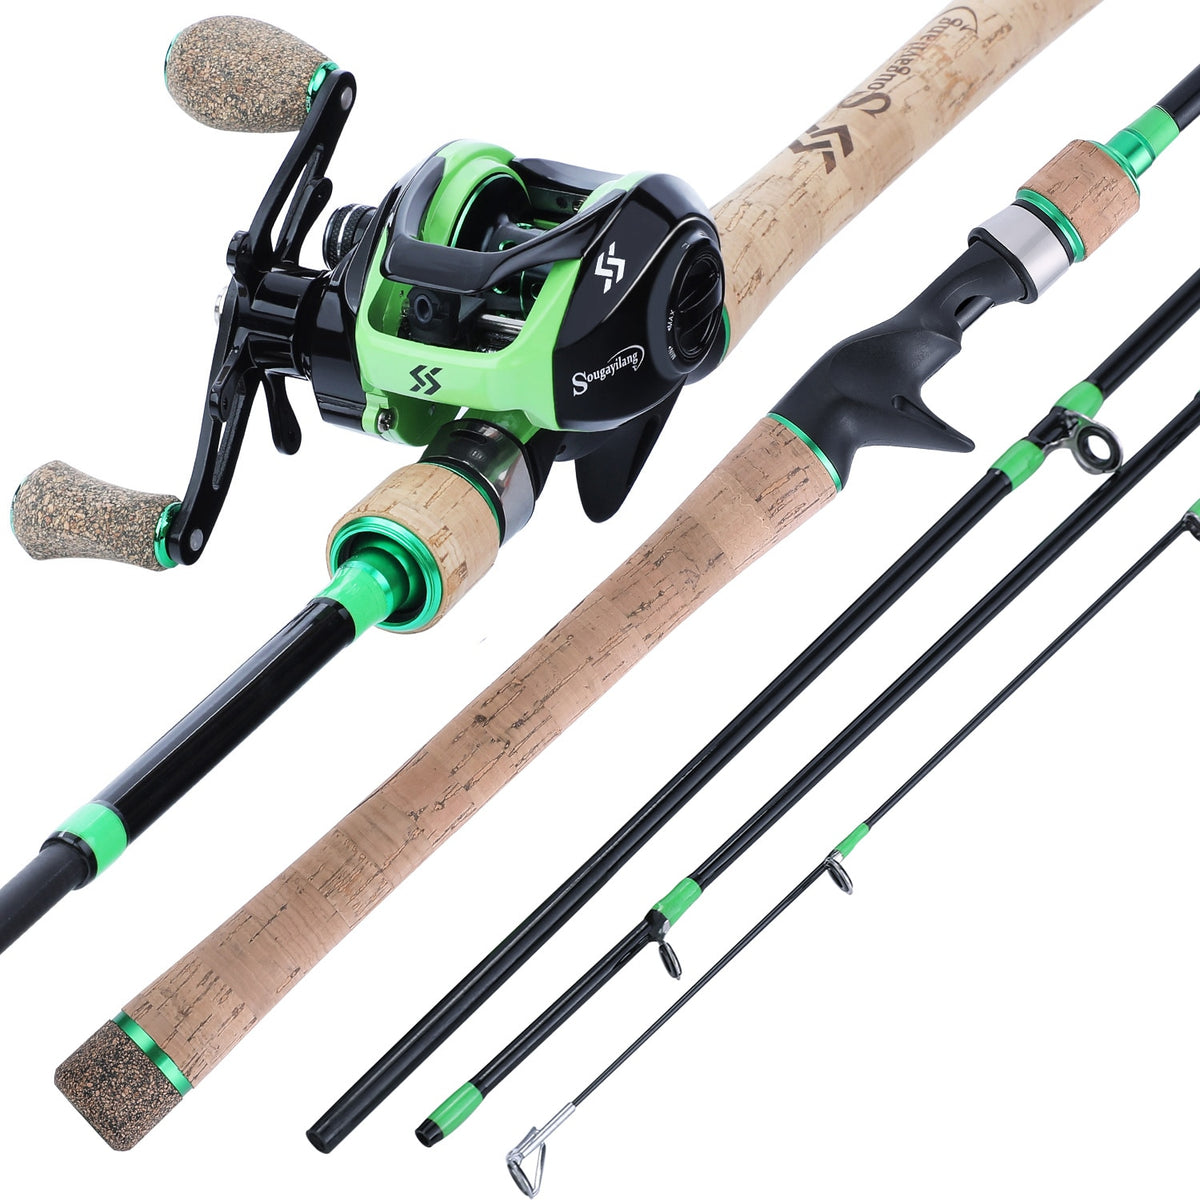  Baitcasting Fishing Rod Combo 2.1M 4 Sections Carbon